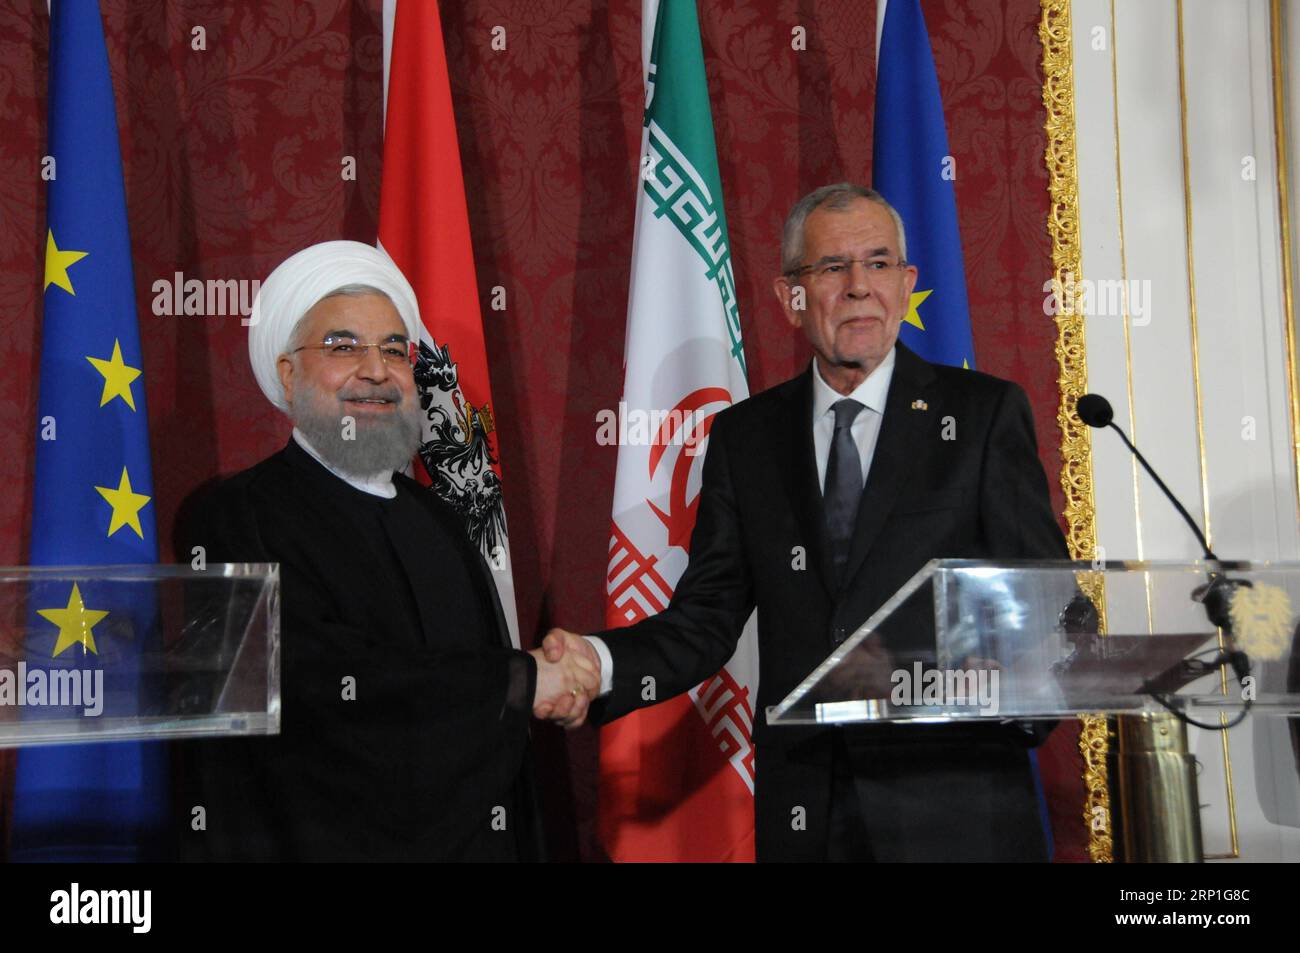 News Themen der Woche News Bilder des Tages  (180704) -- VIENNA, July 4, 2018 -- Iranian President Hassan Rouhani (L) and his Austrian counterpart Alexander Van der Bellen attend a press conference in Vienna, Austria, July 4, 2018. Hassan Rouhani Wednesday reassured his country s intention on sticking to the Iranian nuclear deal despite a recent withdrawal by the United States. ) AUSTRIA-VIENNA-IRAN-PRESIDENT-NUCLEAR DEAL LiuxXiang PUBLICATIONxNOTxINxCHN Stock Photo